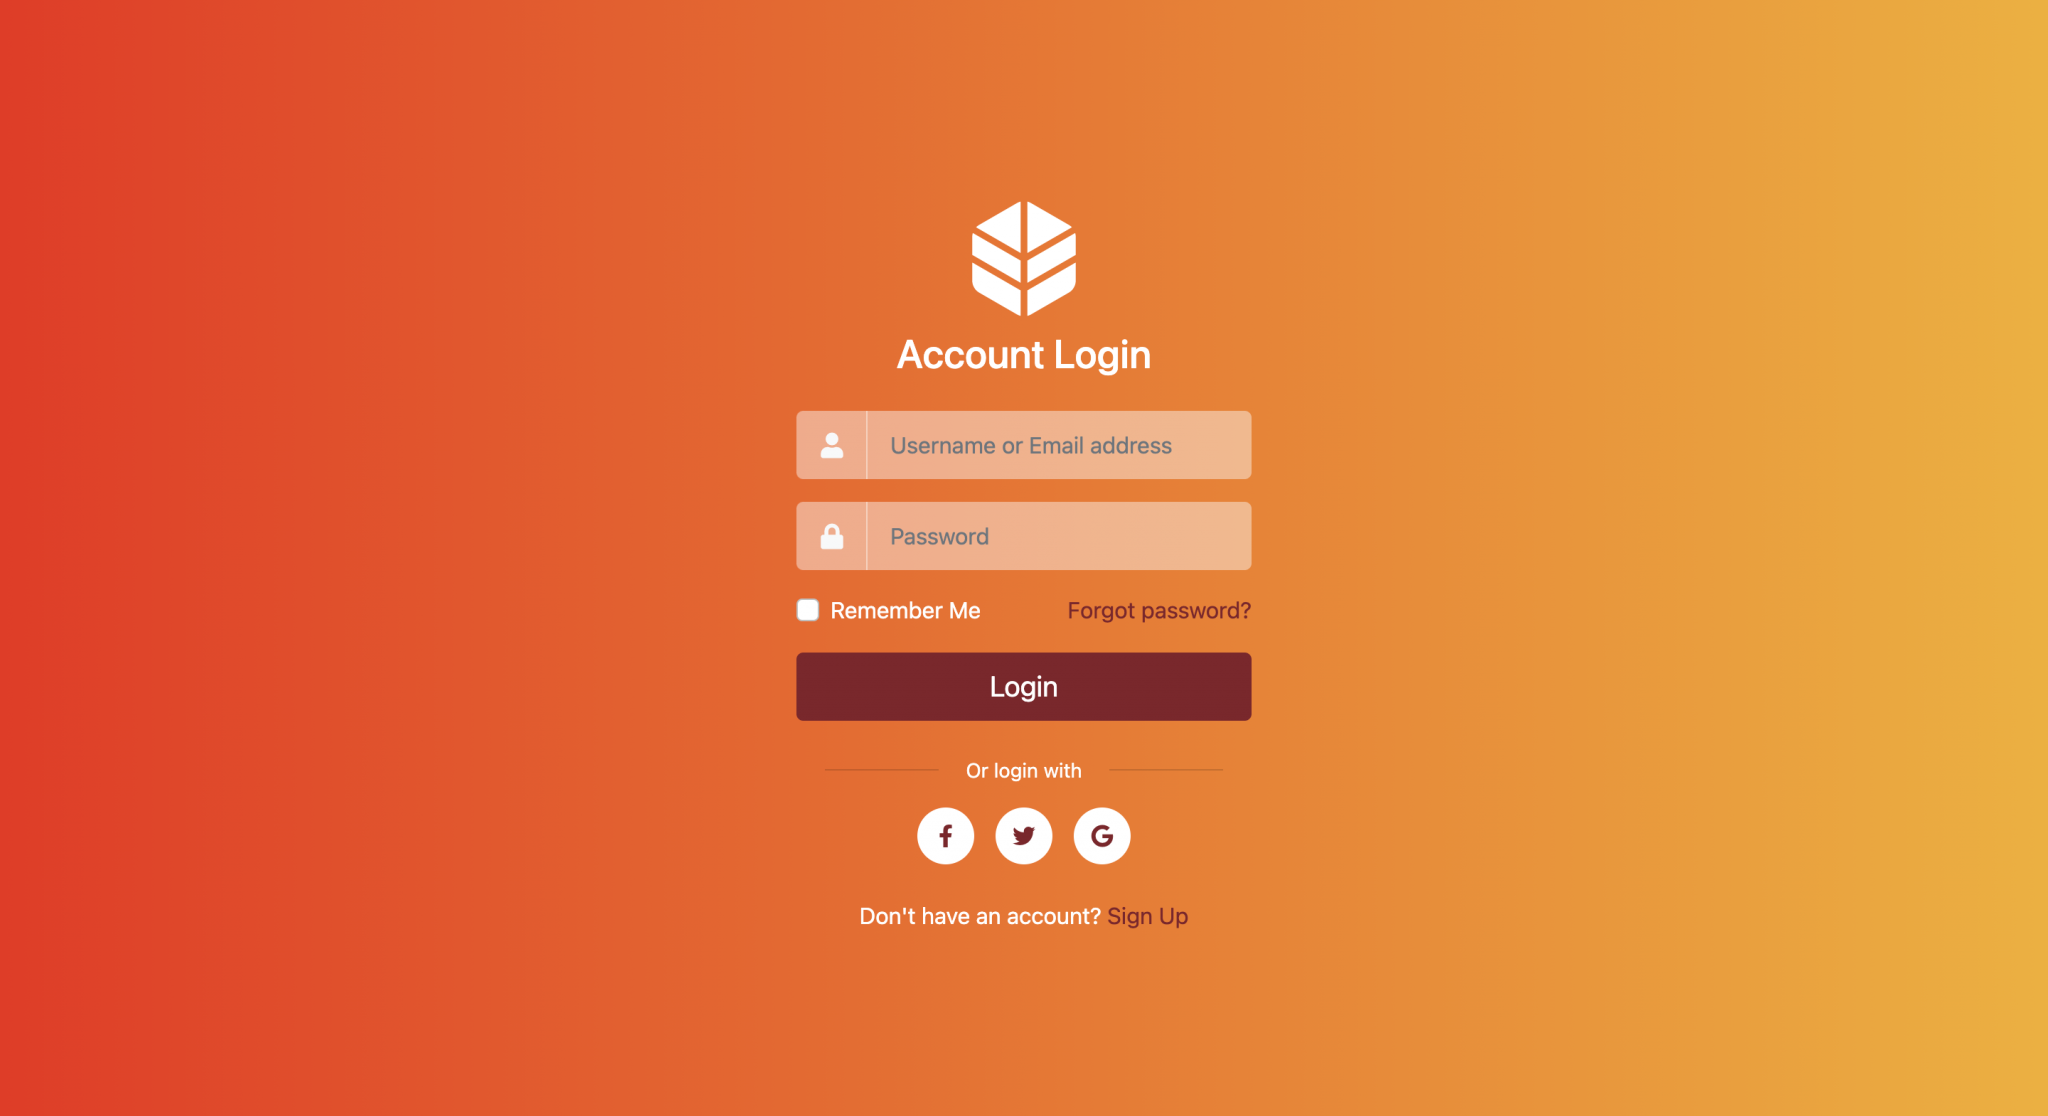 Free Bootstrap Login Templates